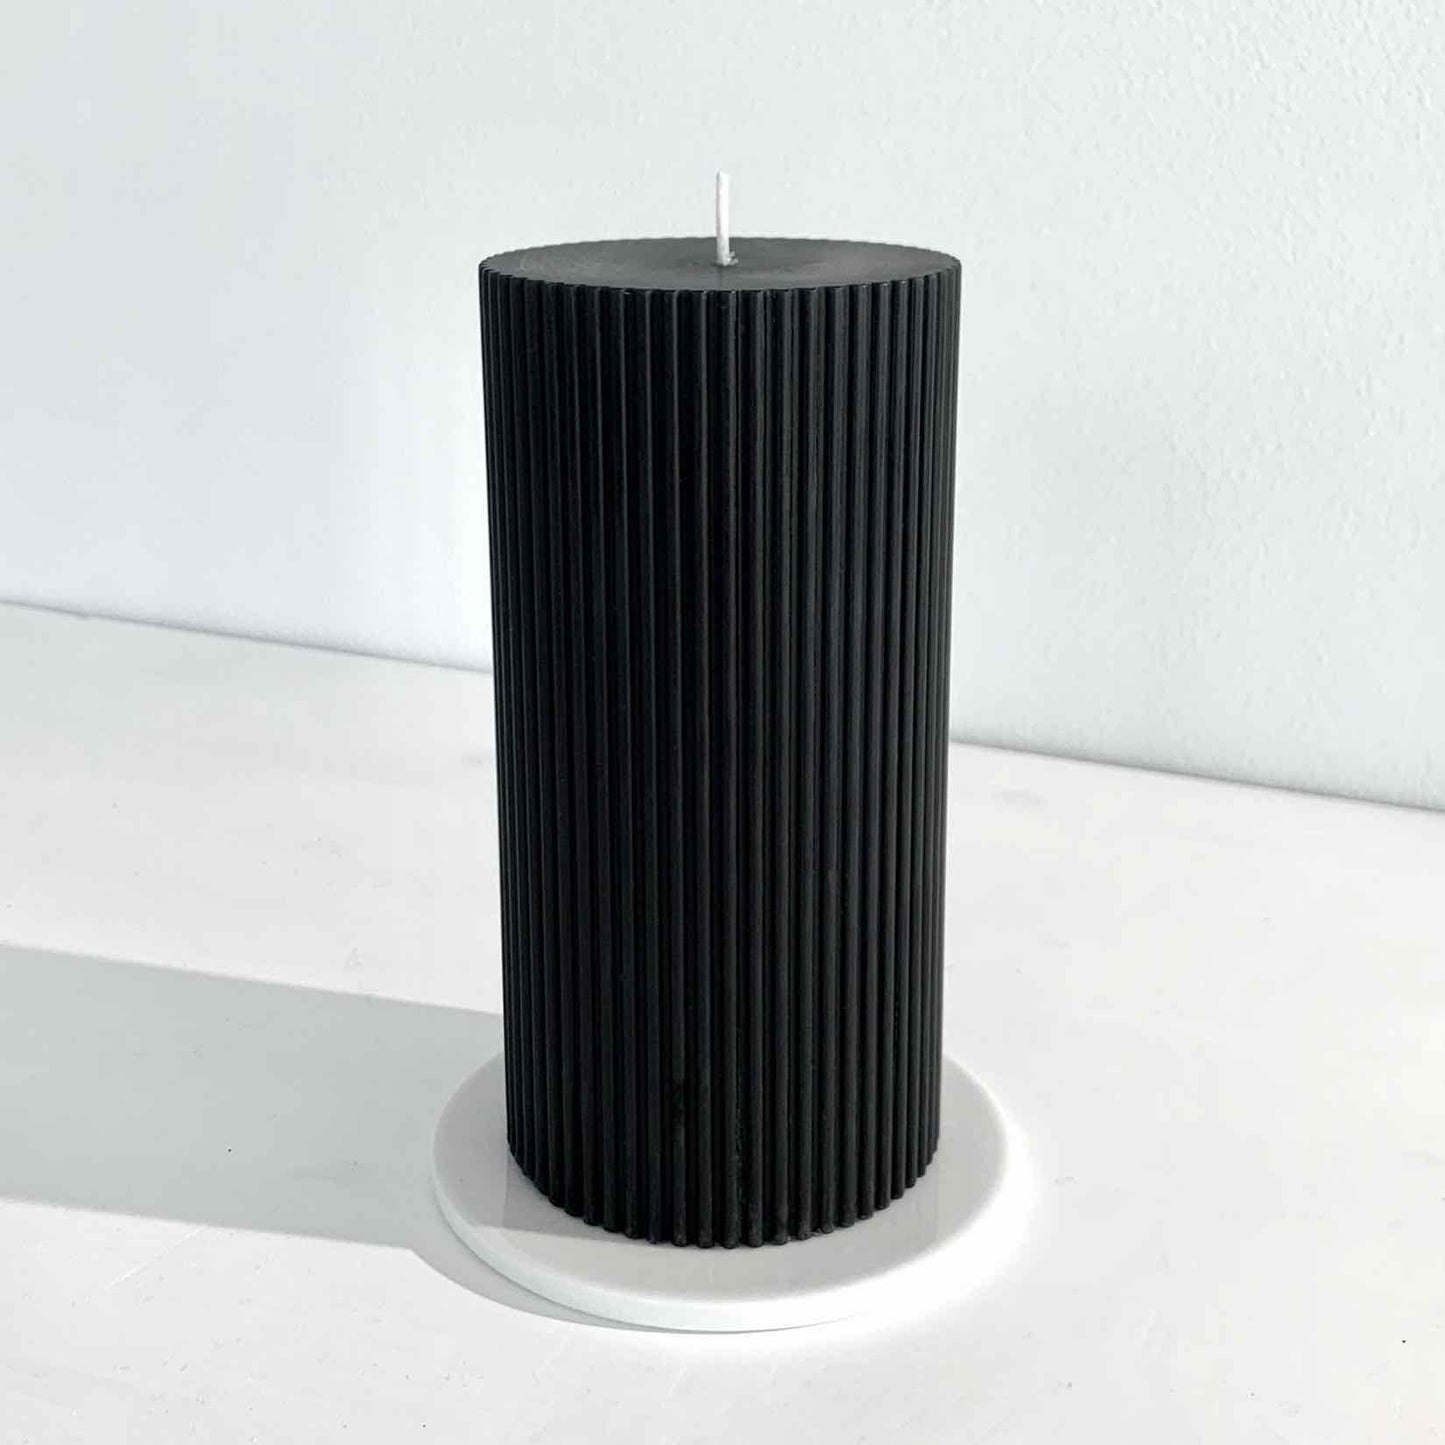 Grooved black pillar candle